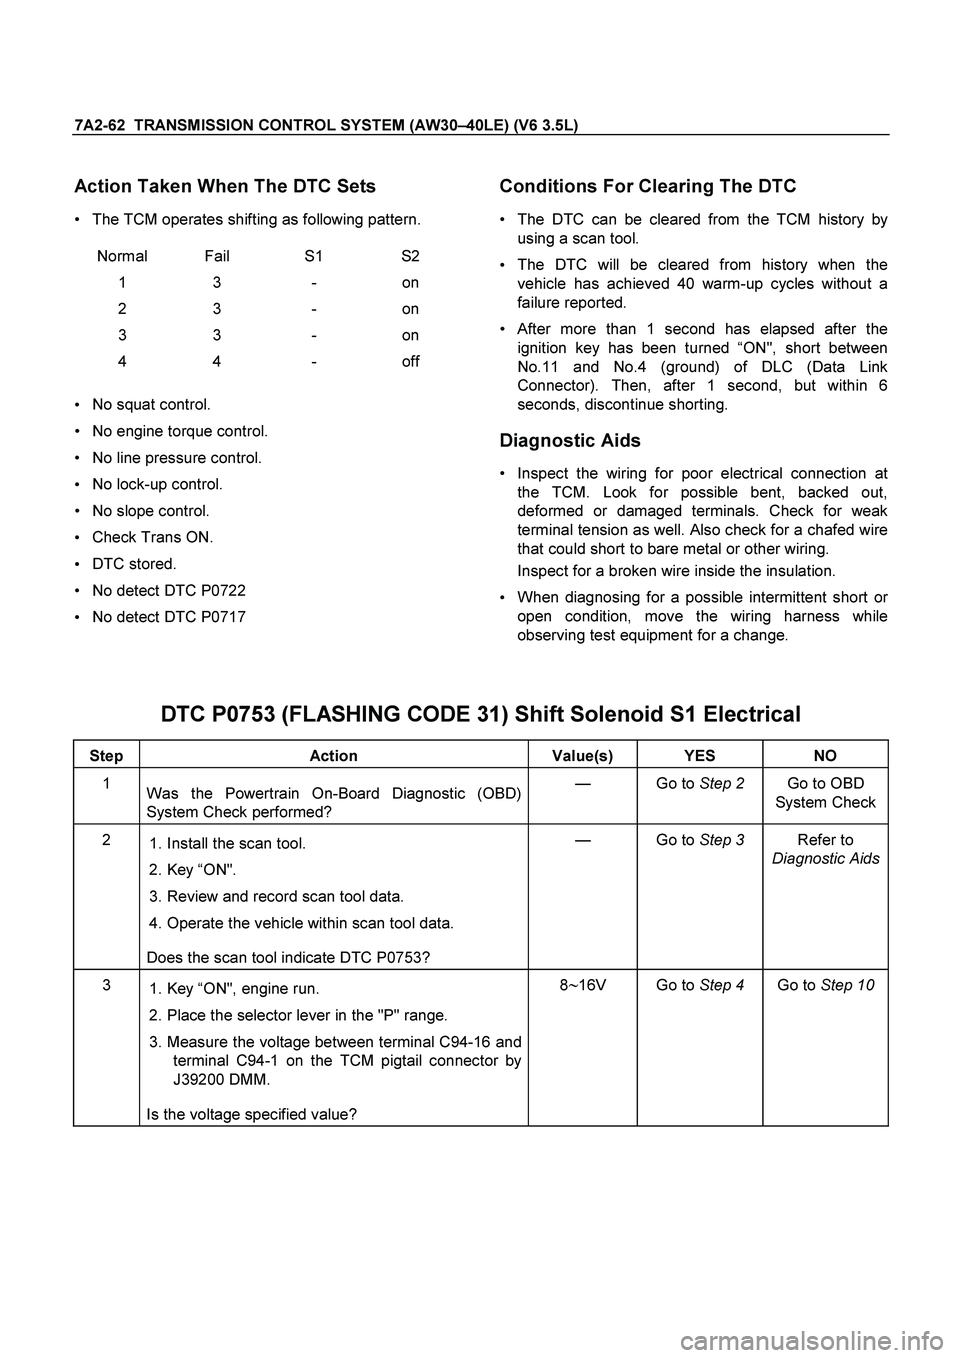 ISUZU TF SERIES 2004  Workshop Manual 7A2-62  TRANSMISSION CONTROL SYSTEM (AW30–40LE) (V6 3.5L)
 
Action Taken When The DTC Sets 
 
The TCM operates shifting as following pattern.  
  
 
 
Normal Fail  S1  S2 
1 3  - on 
2 3  - on 
3 3